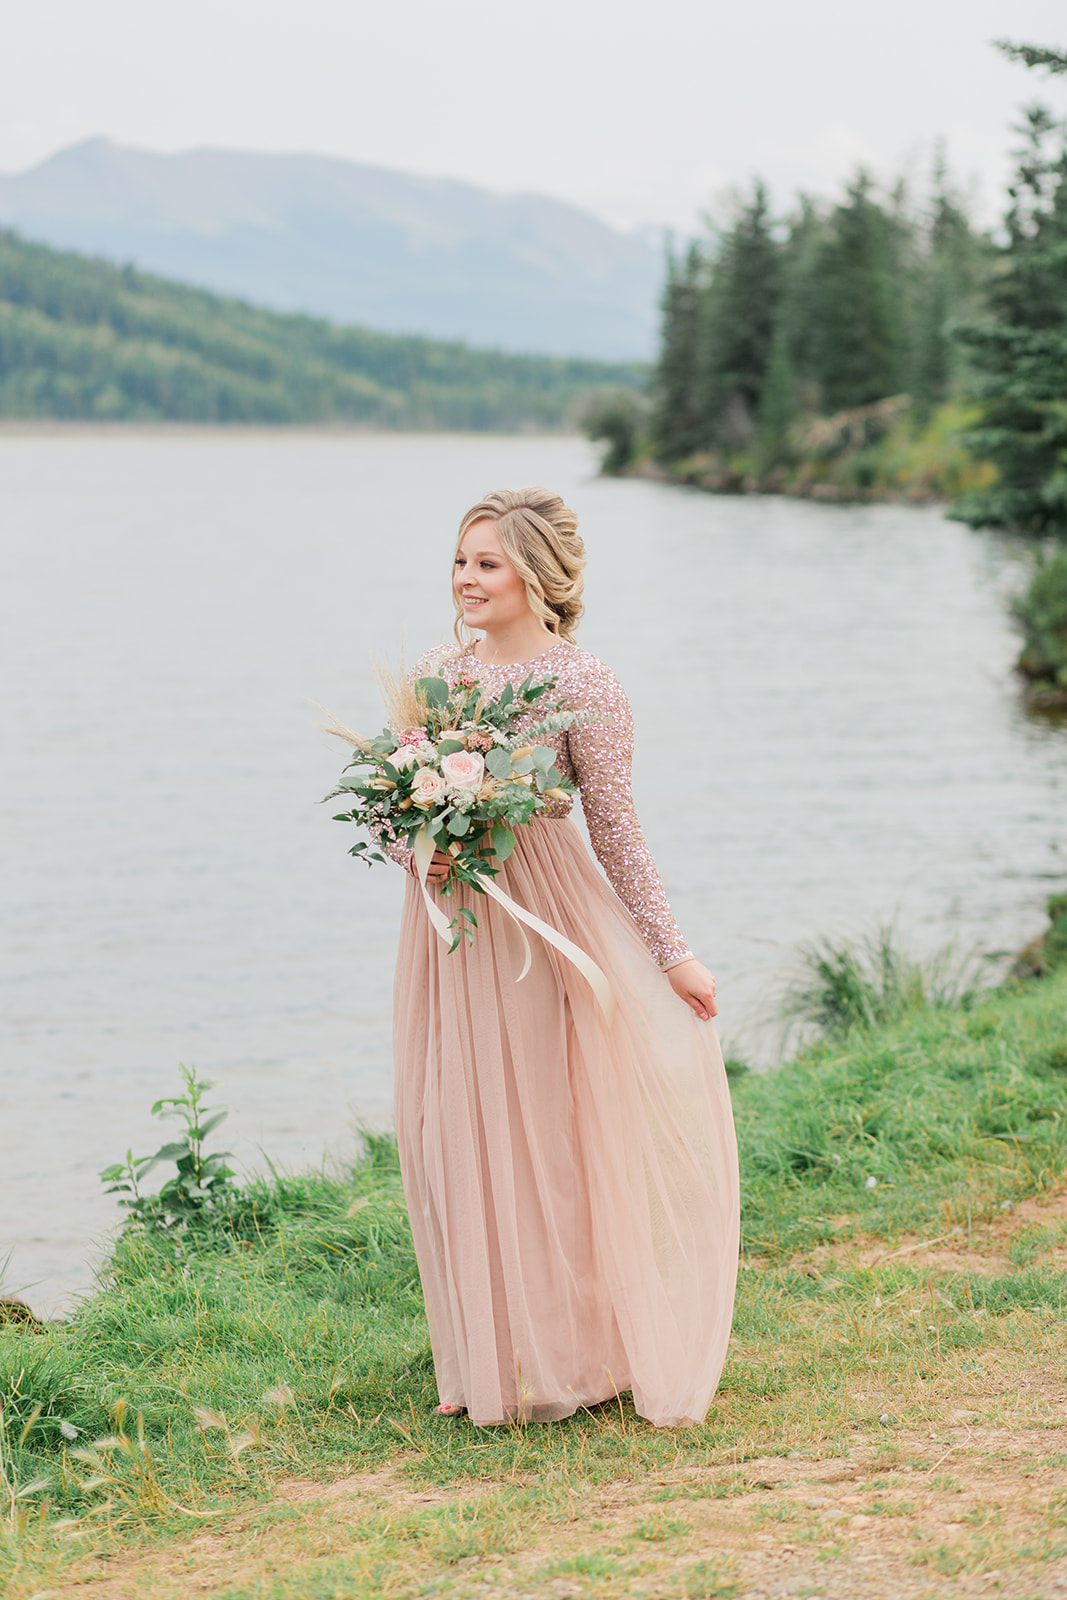 Lakeside blushing bride in a sparkling blush gown with mountain views in the background